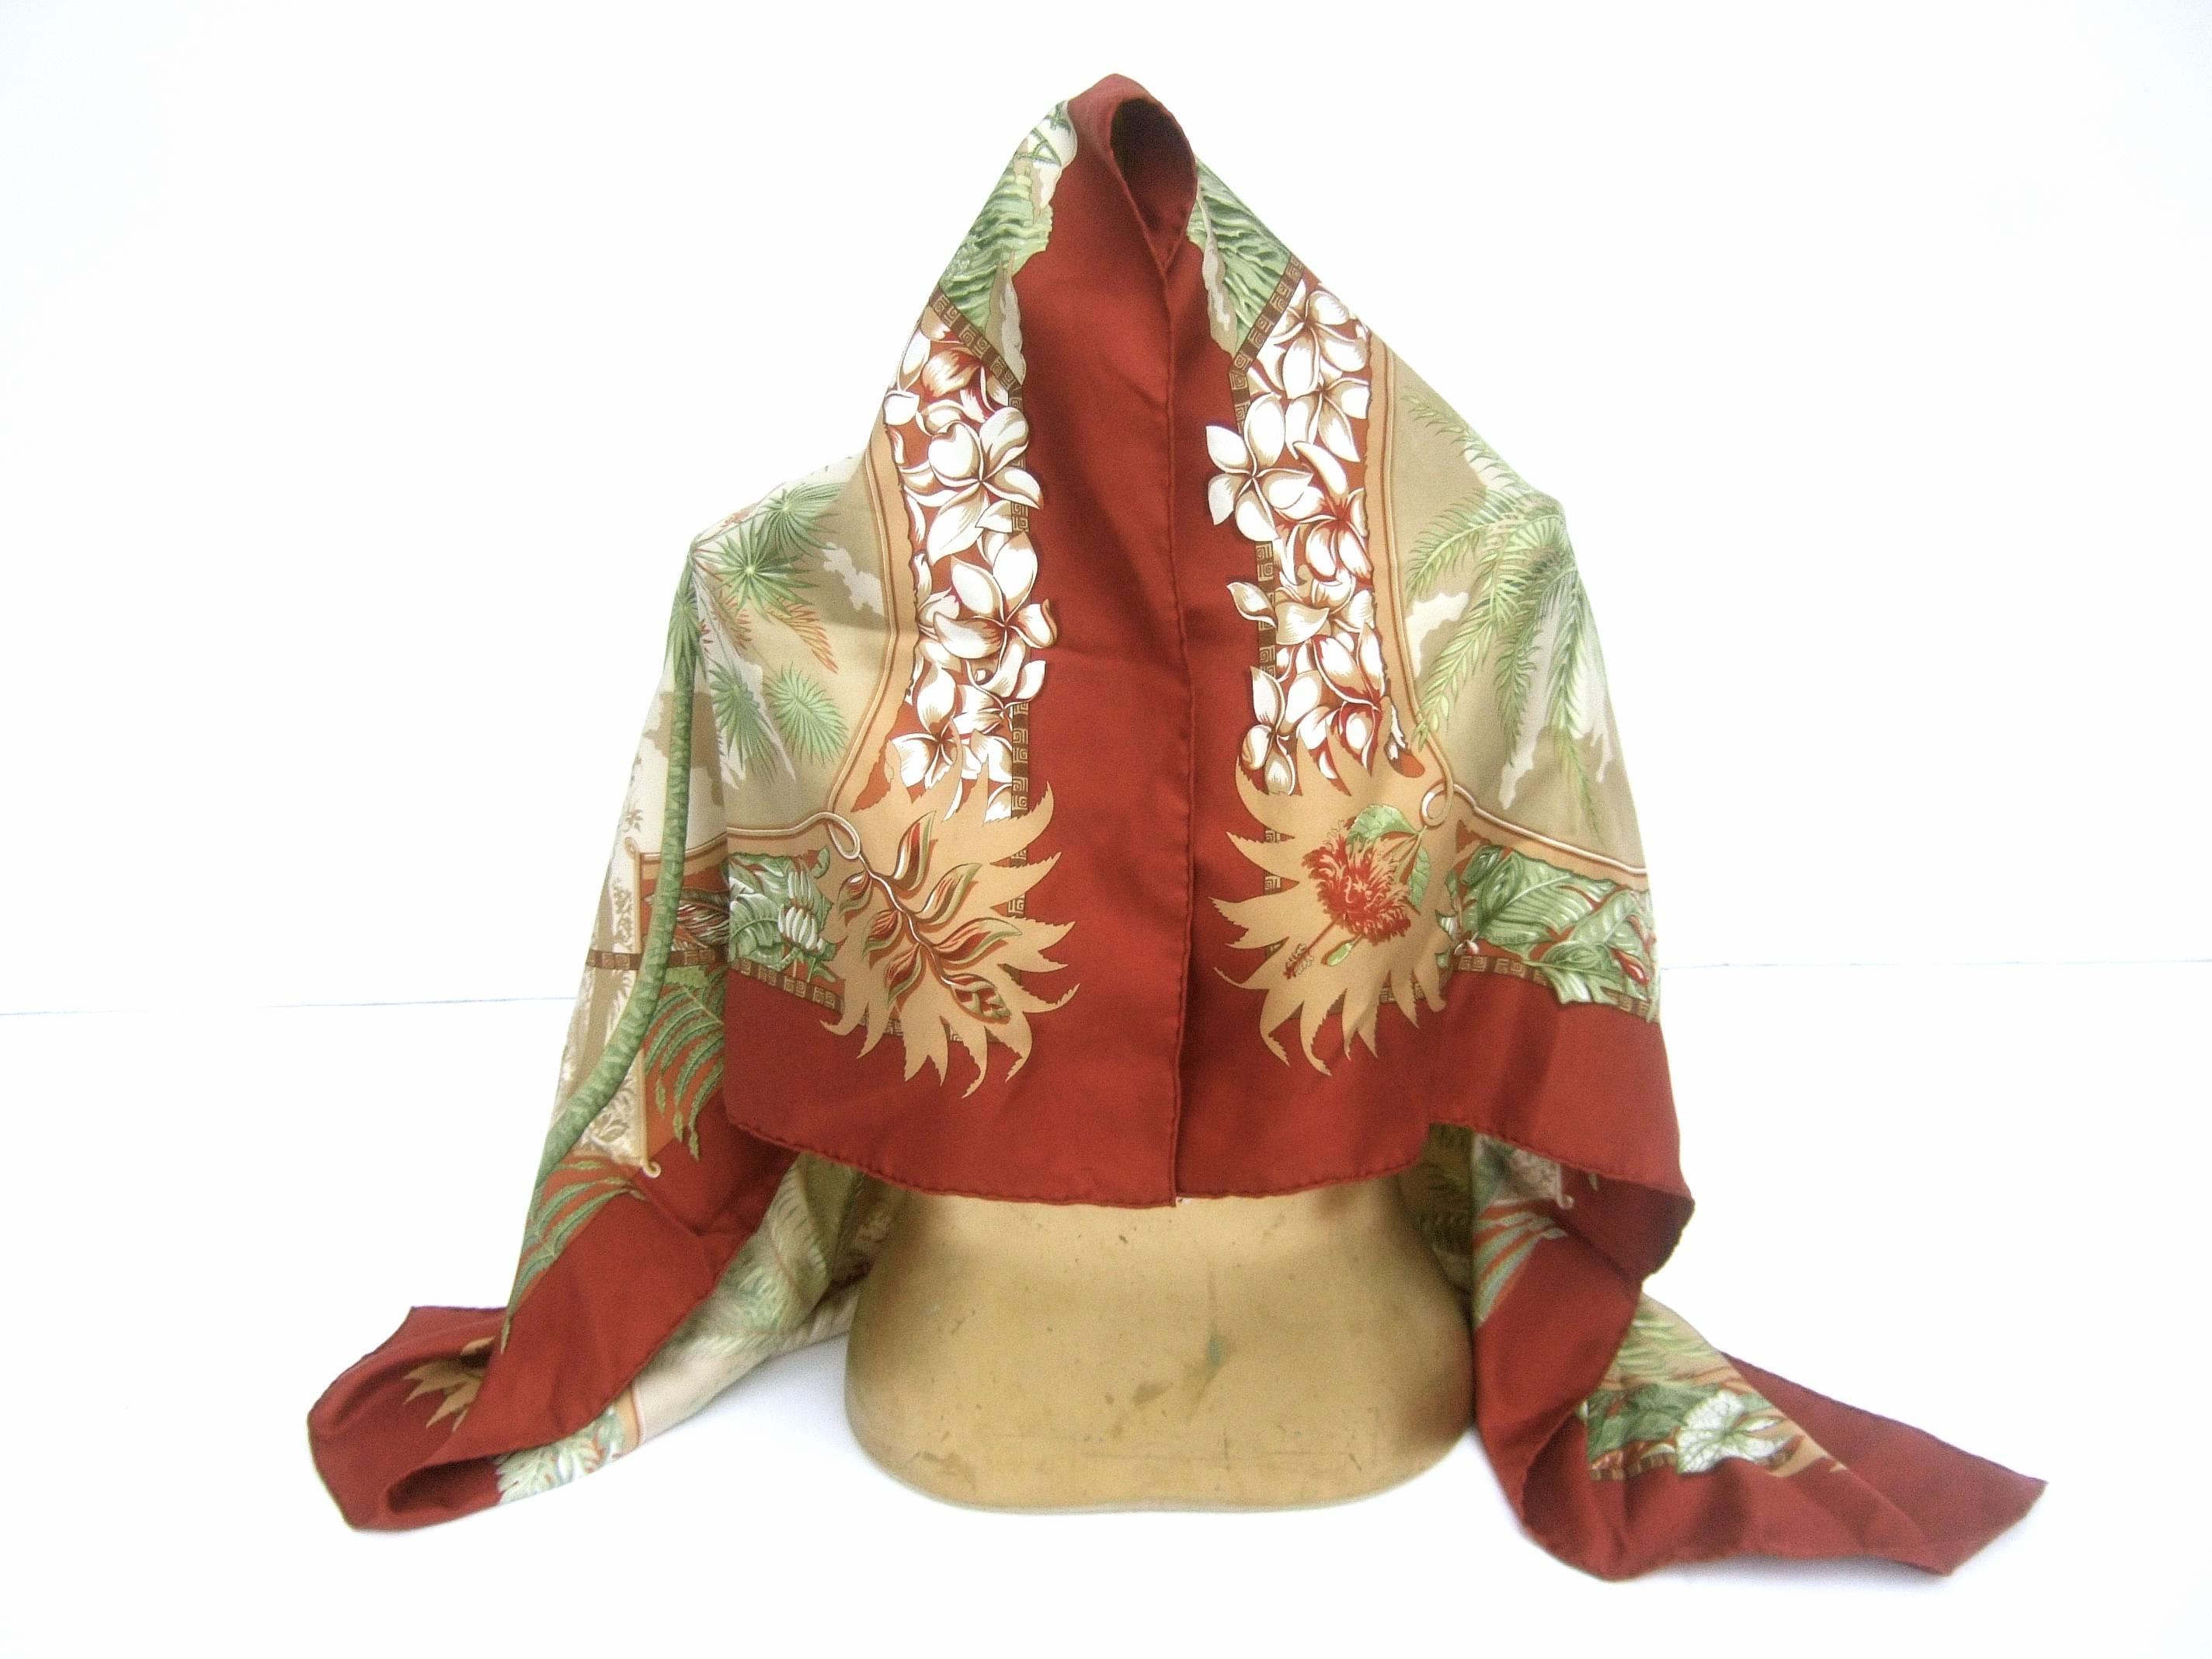 Hermes Luxurious Hawaiian theme silk scarf in Hermes box
The hand rolled silk scarf is illustrated with an exotic 
Polynesian woman in traditional Hawaiian attire

The dancing woman is surrounded by a mature tree
at the center surrounded by a flock